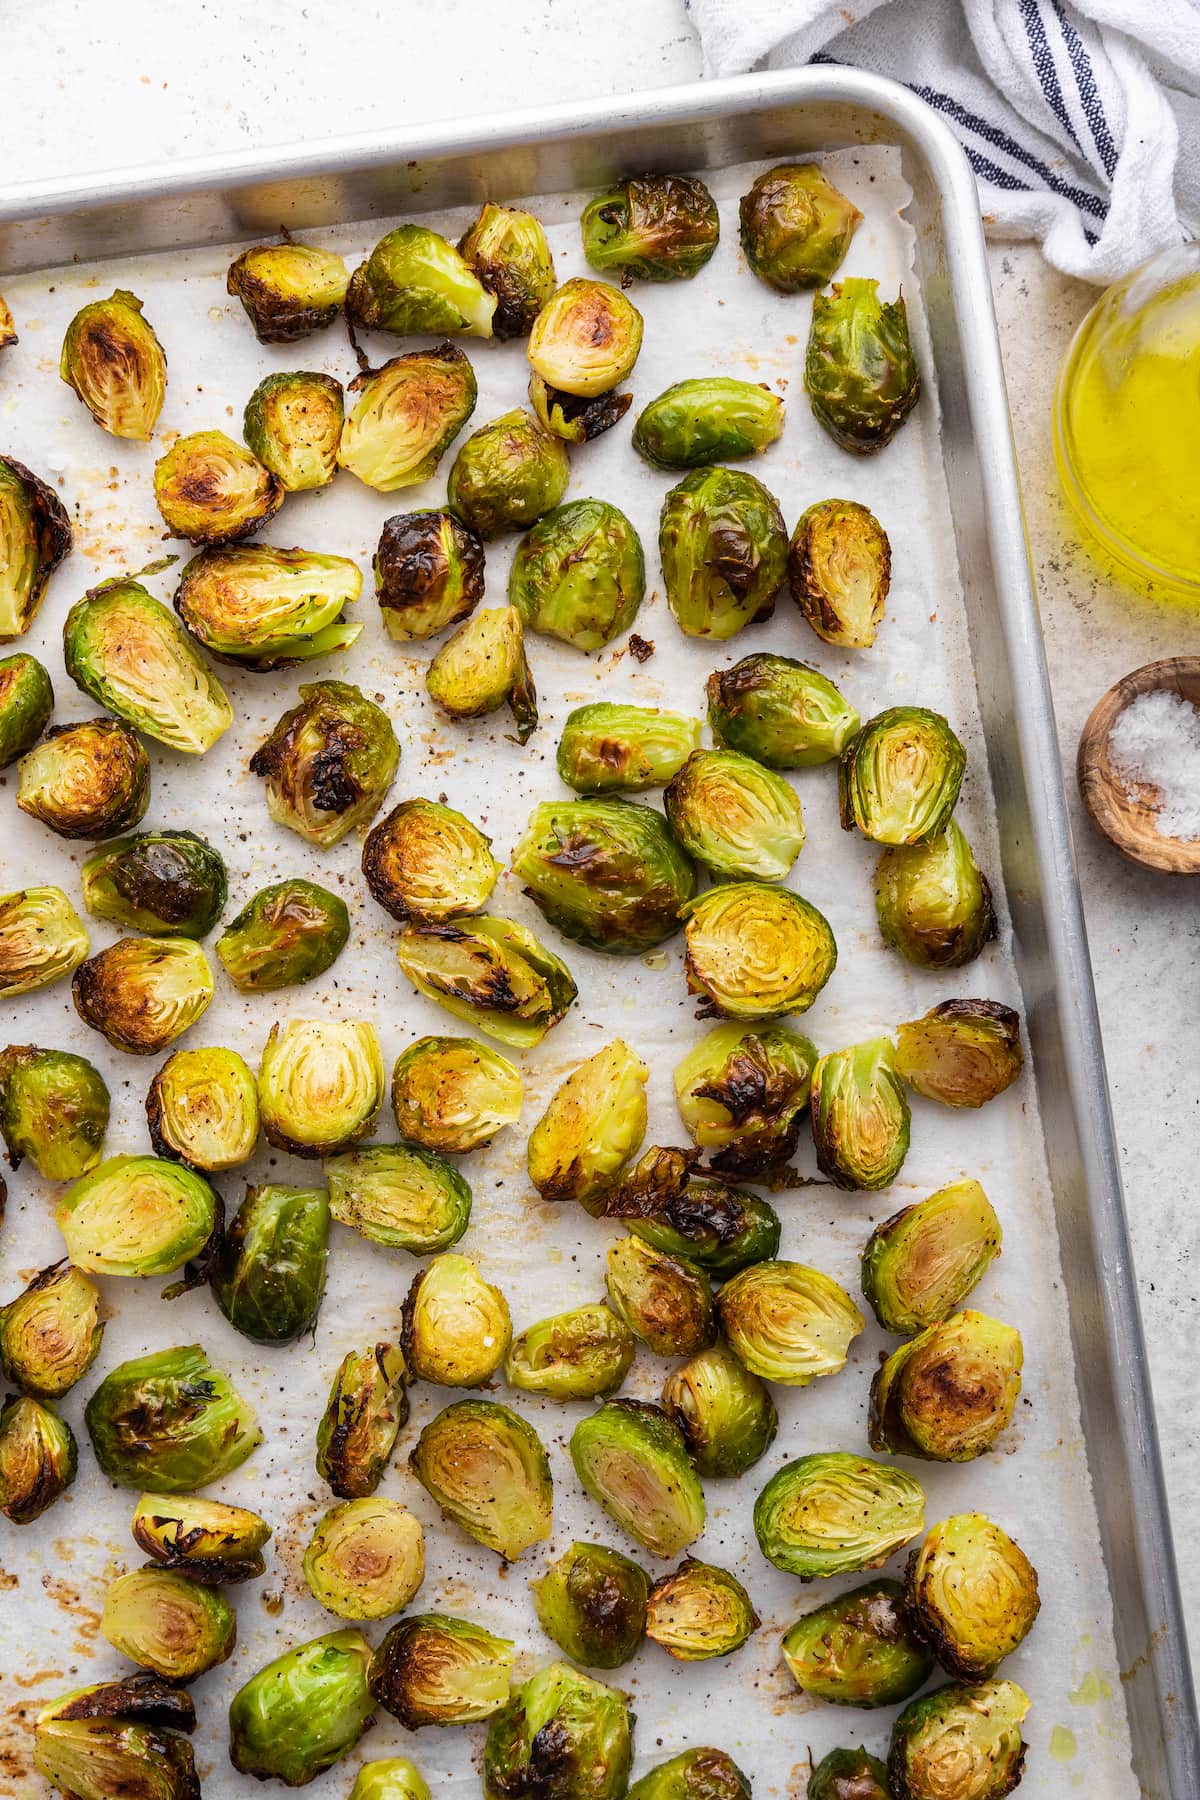 Roasted brussels sprouts on parchment paper on a baking tray.